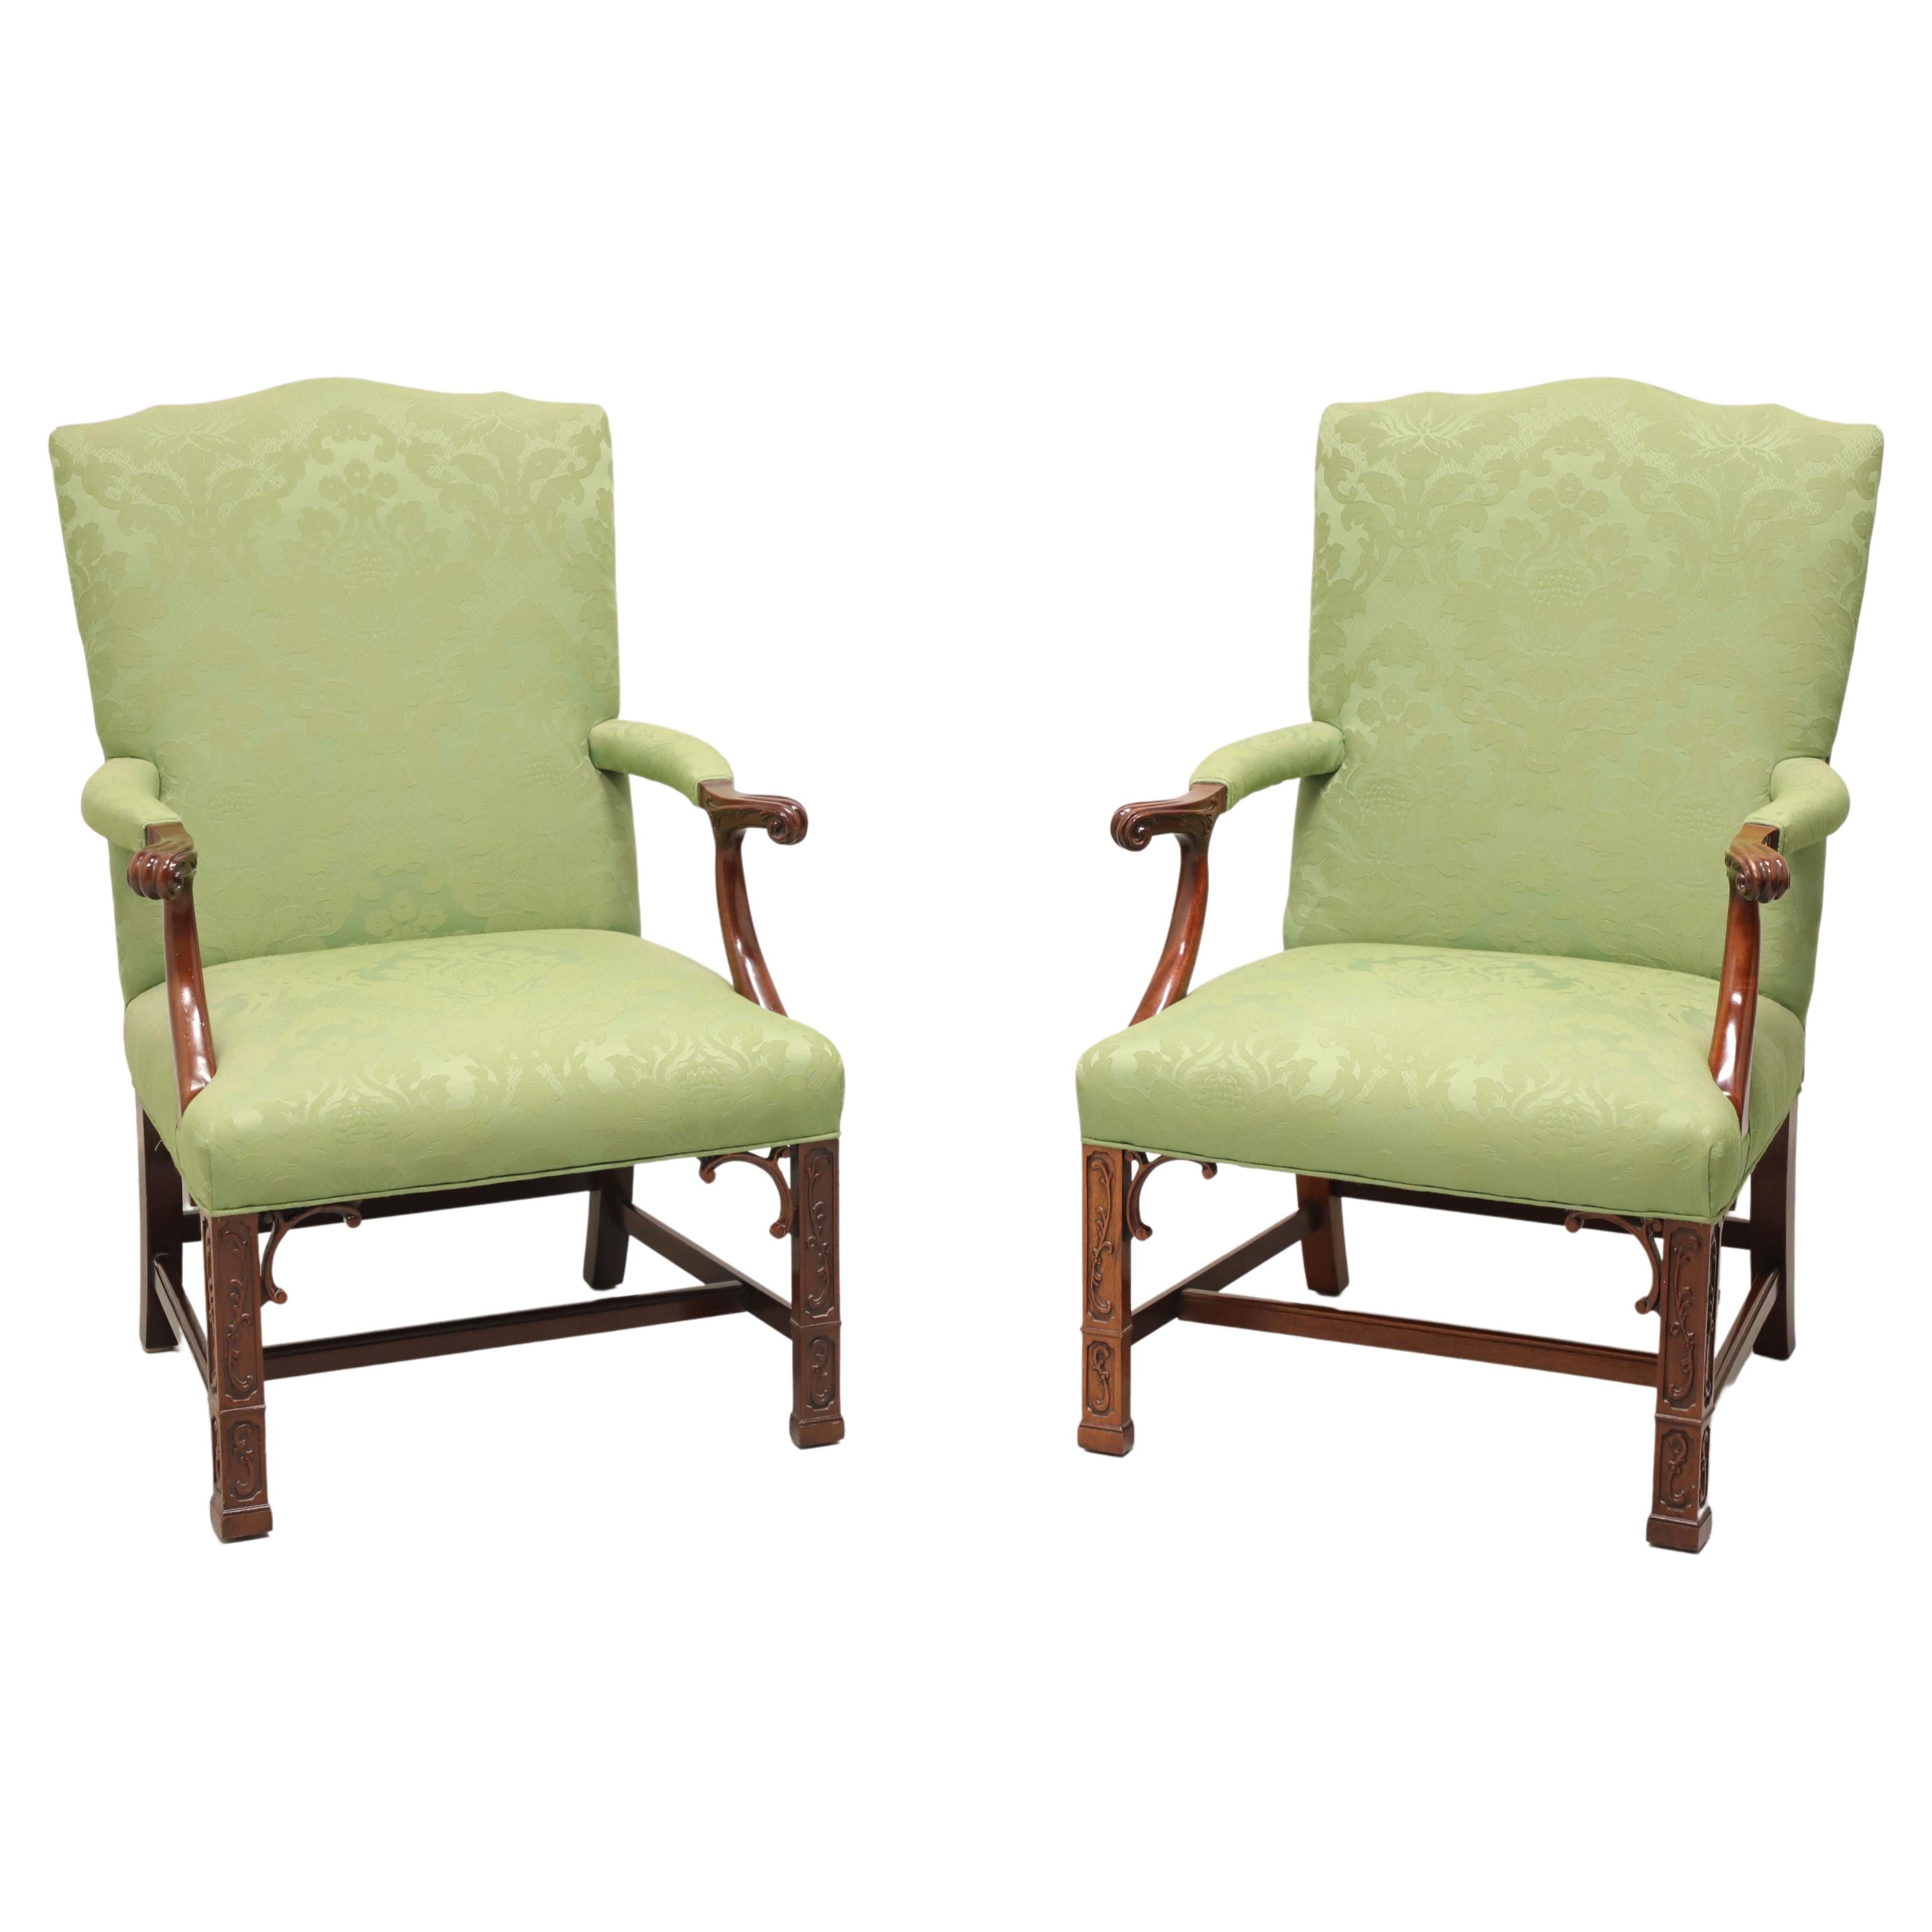 SOUTHWOOD Gainsborough Mahogany Chippendale Style Fretwork Armchairs - Pair For Sale